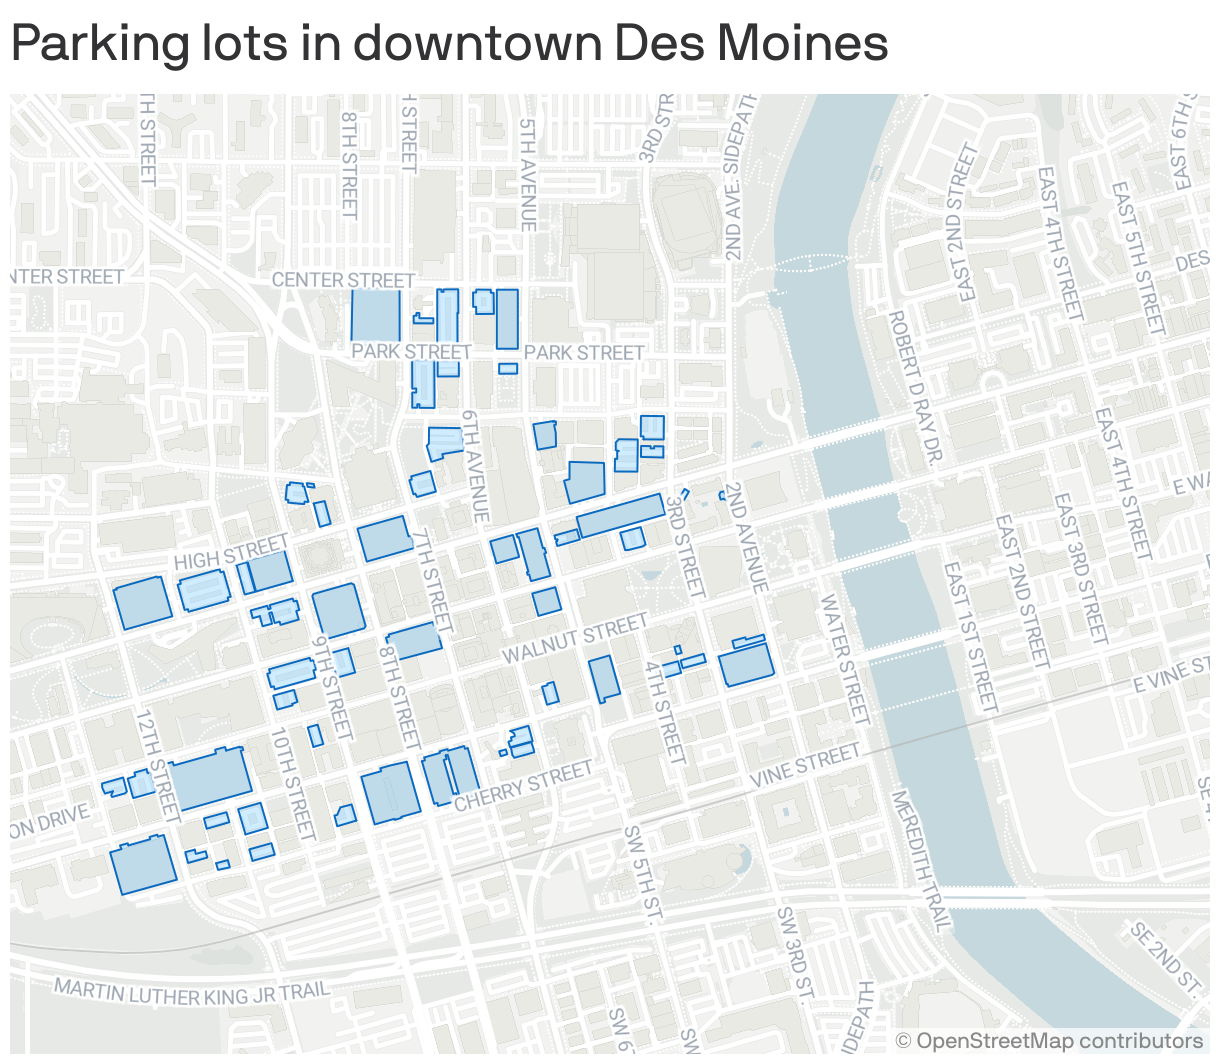 Parking lots in downtown Des Moines